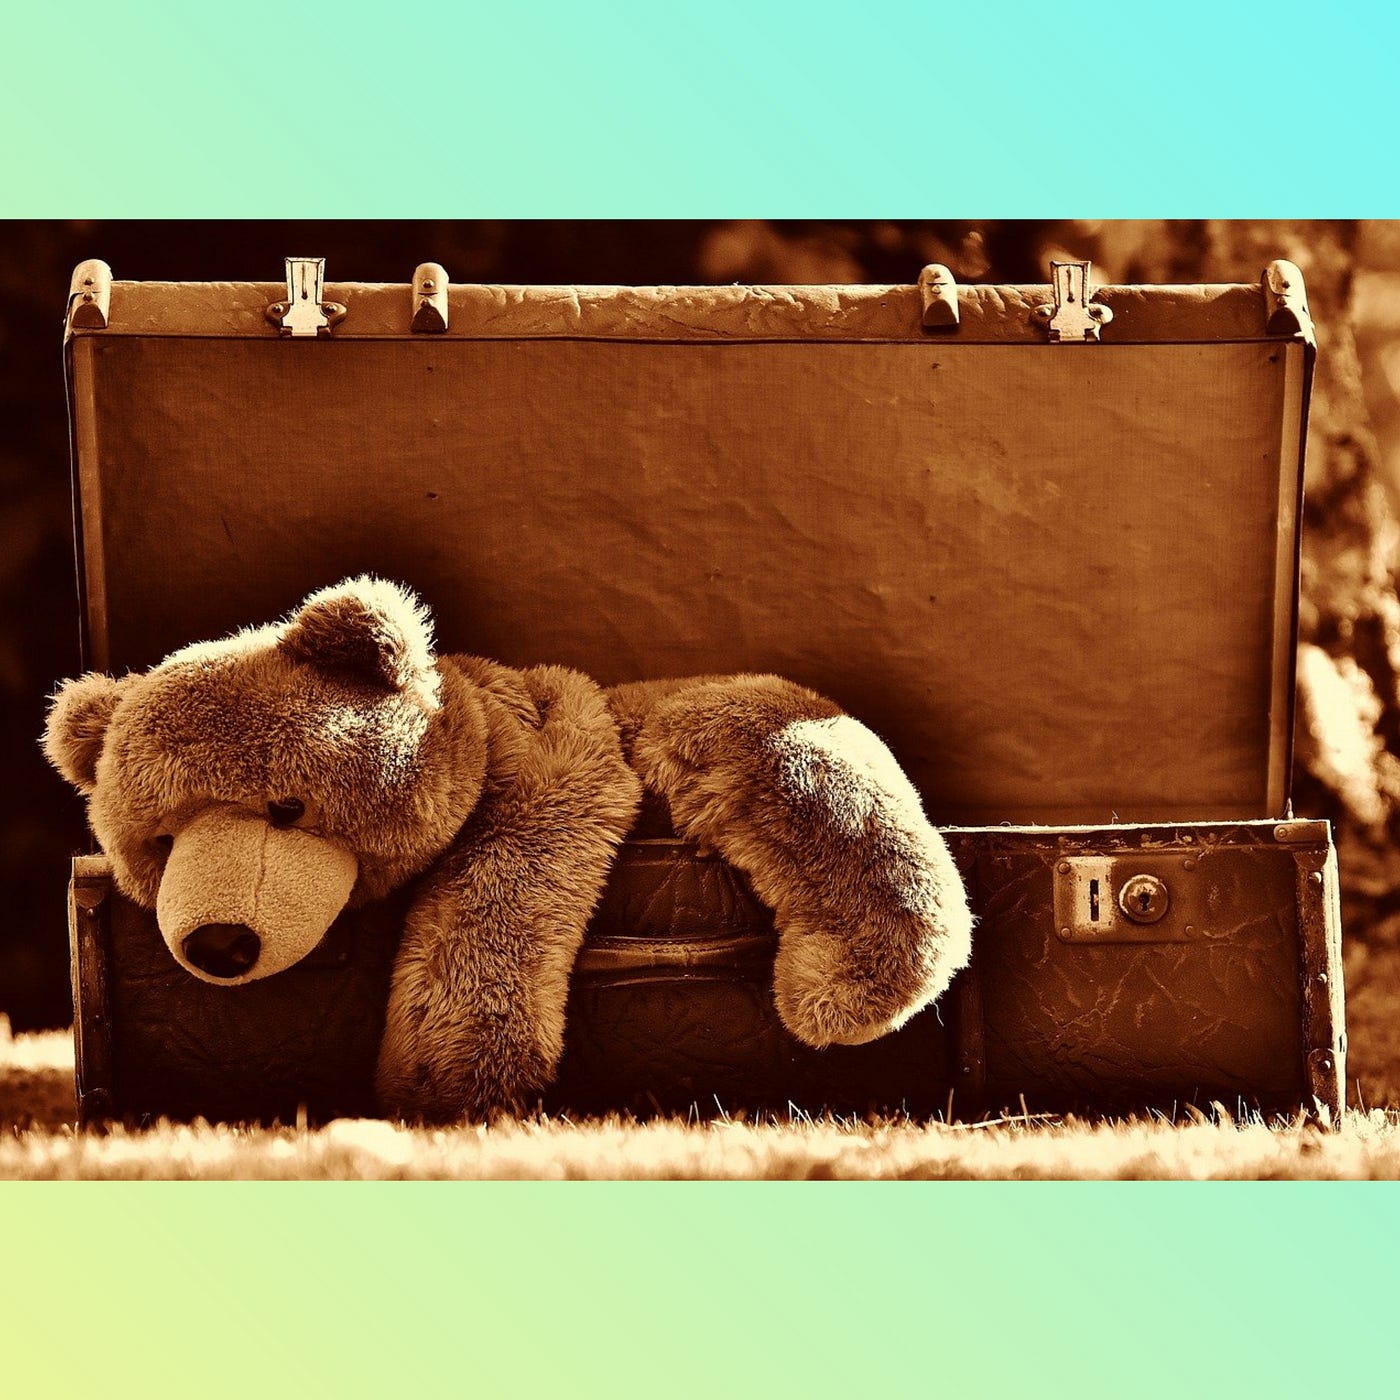 Playing Boo with Bears. Short fiction by Rhoda Anne